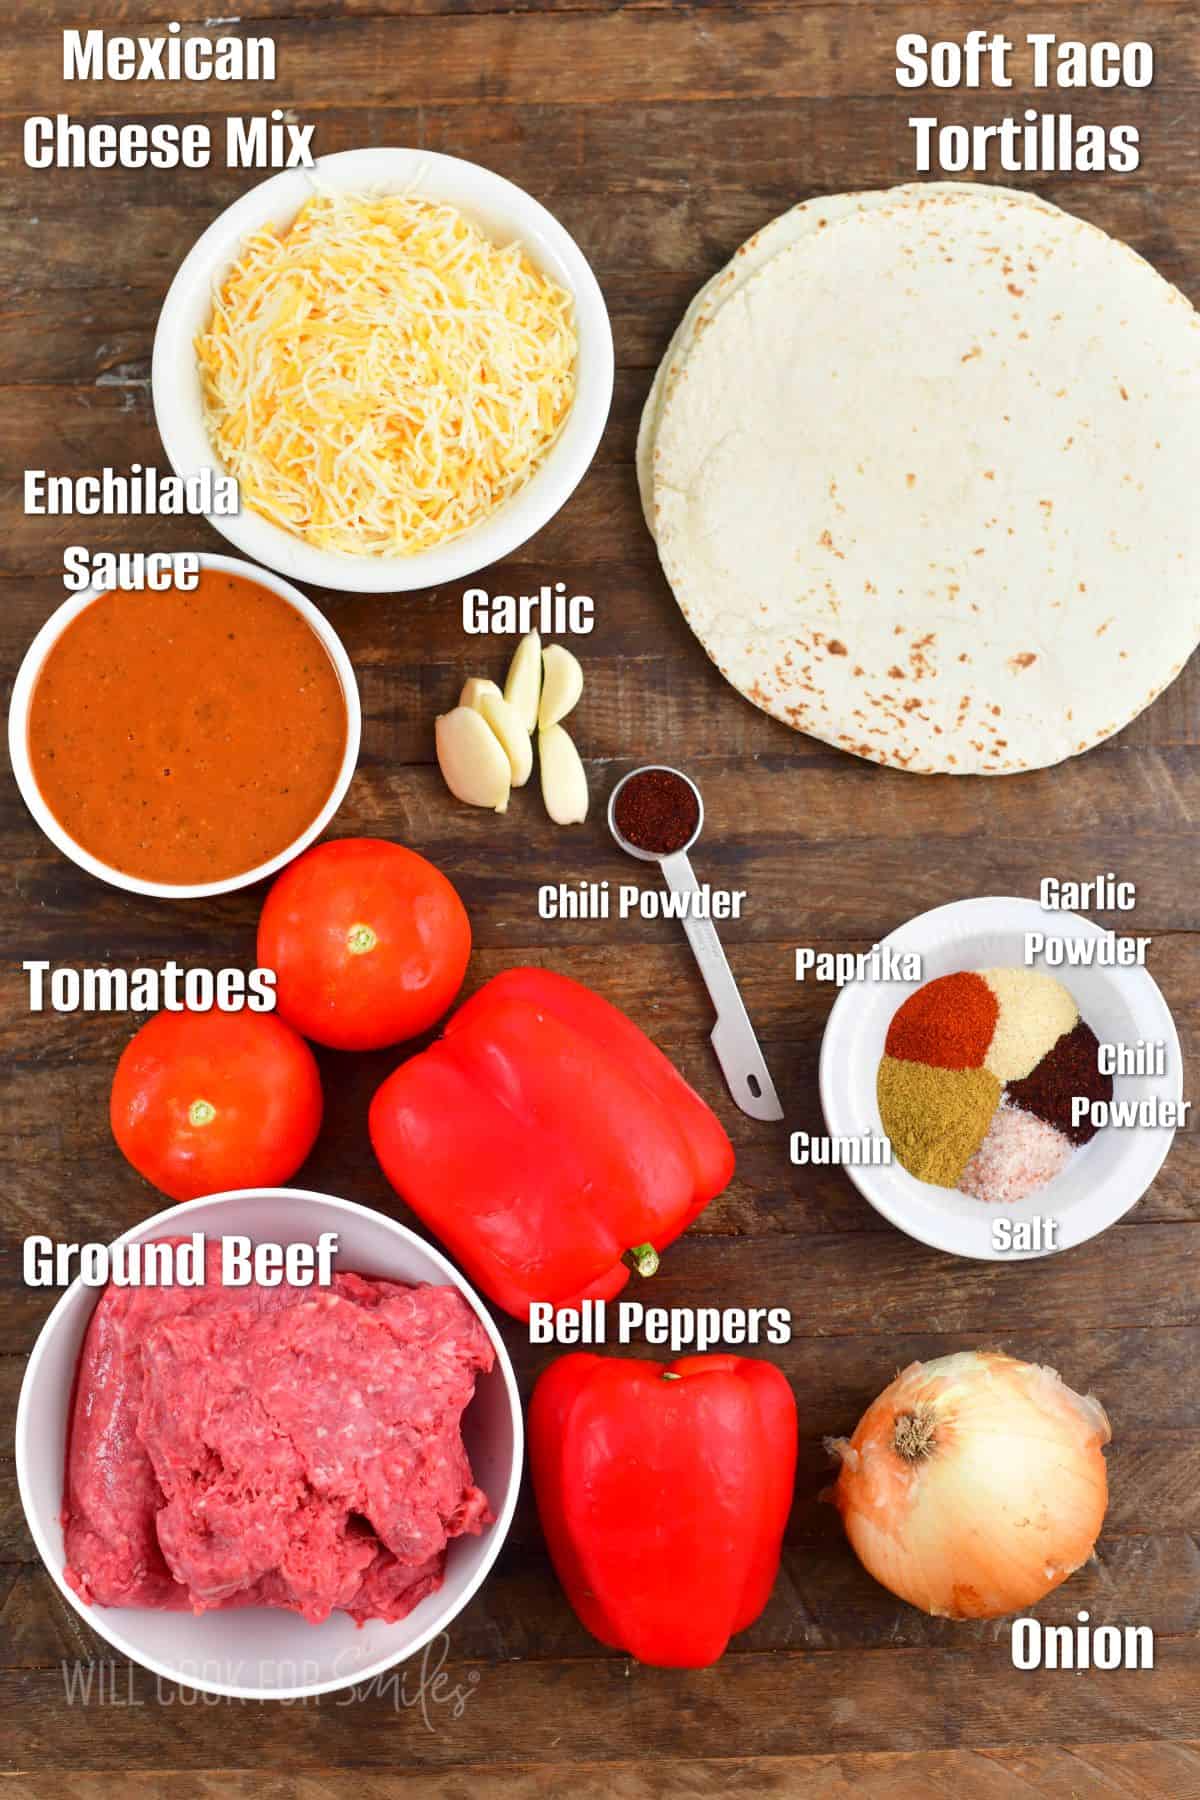 labeled ingredients for the beef enchiladas on a wooden board.